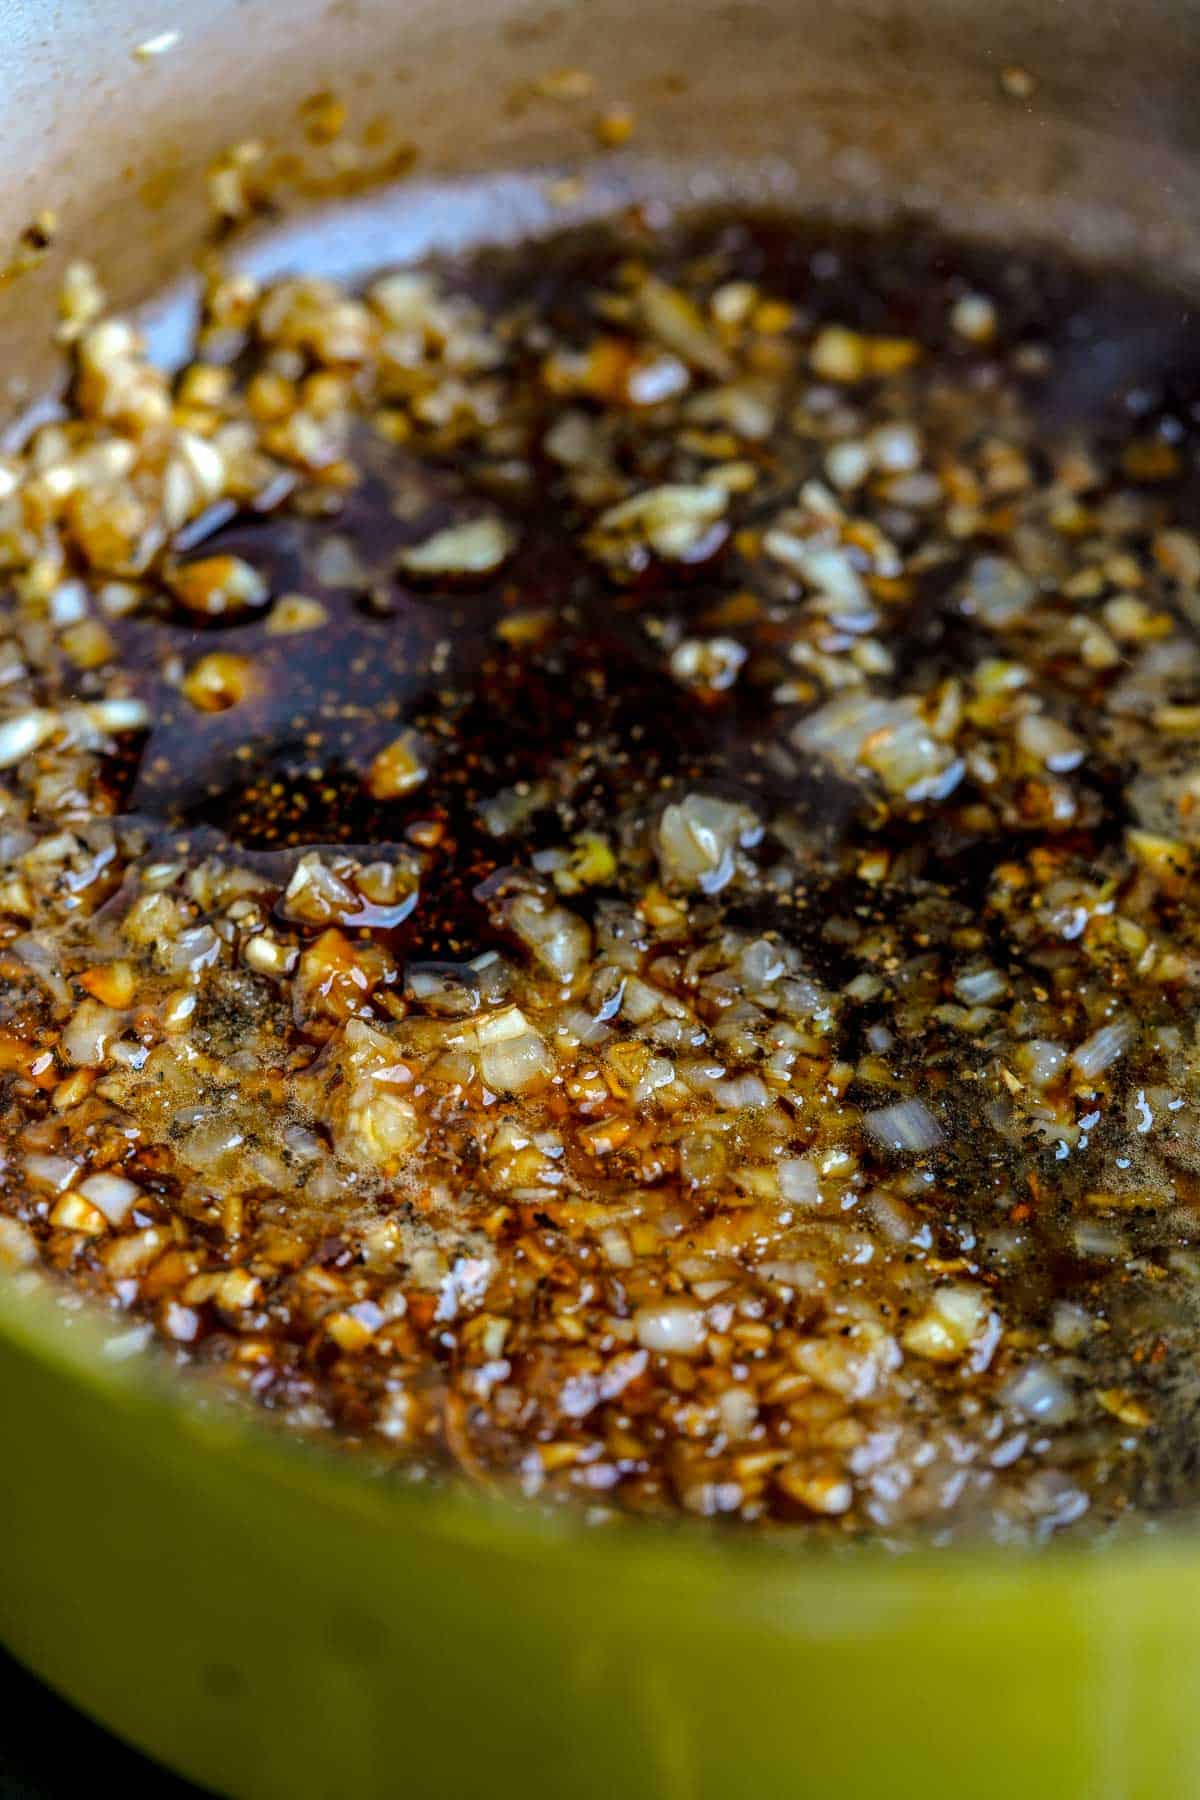 Soy sauce mixture is added to the cooking onions and garlic in a pan.